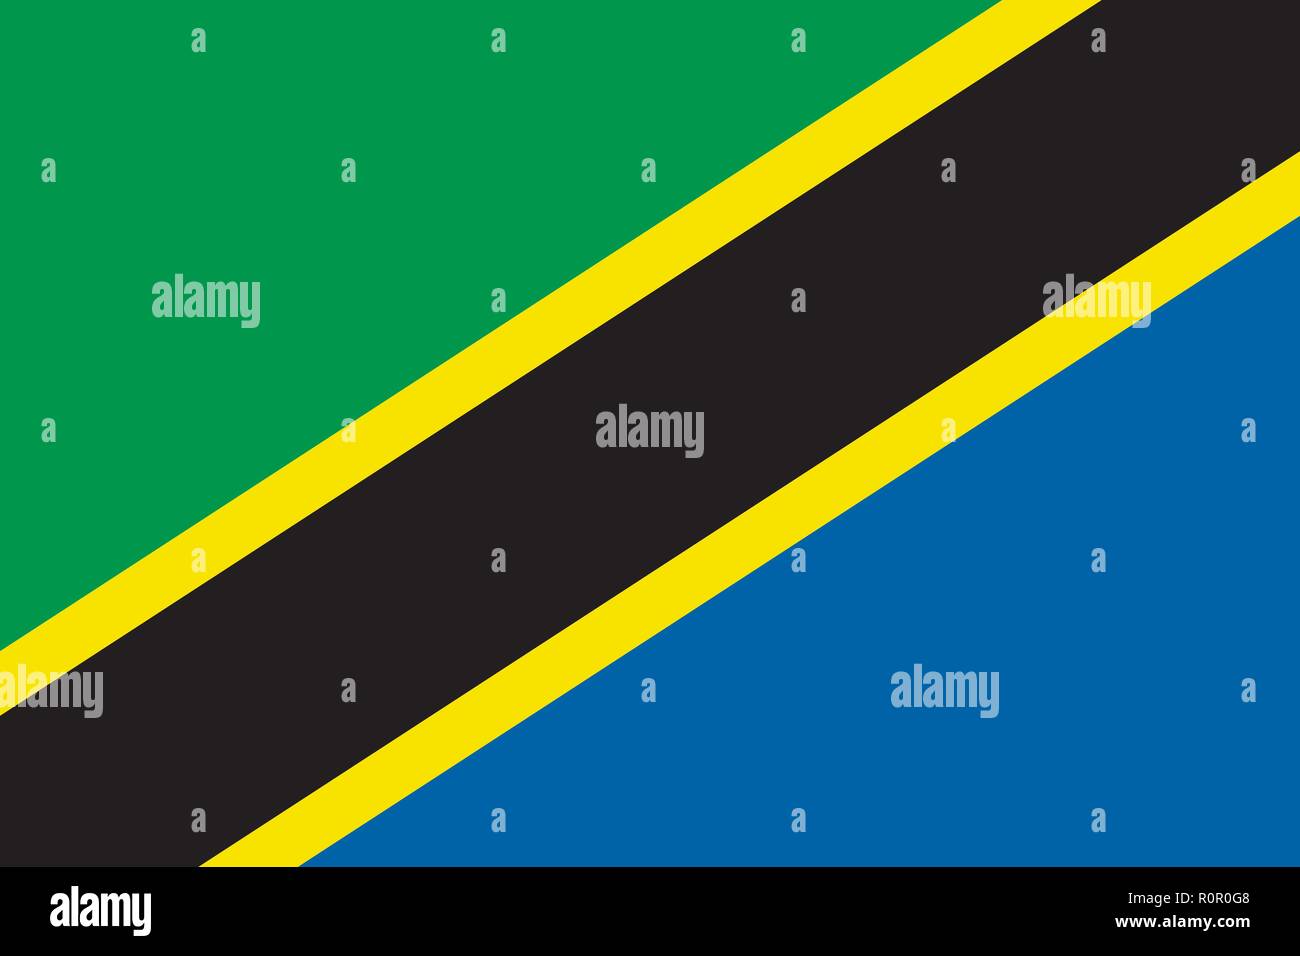 Vector image for Tanzania flag. Based on the official and exact Tanzania flag dimensions (3:2) & colors (355C, 300C, Black and 102C) Stock Vector